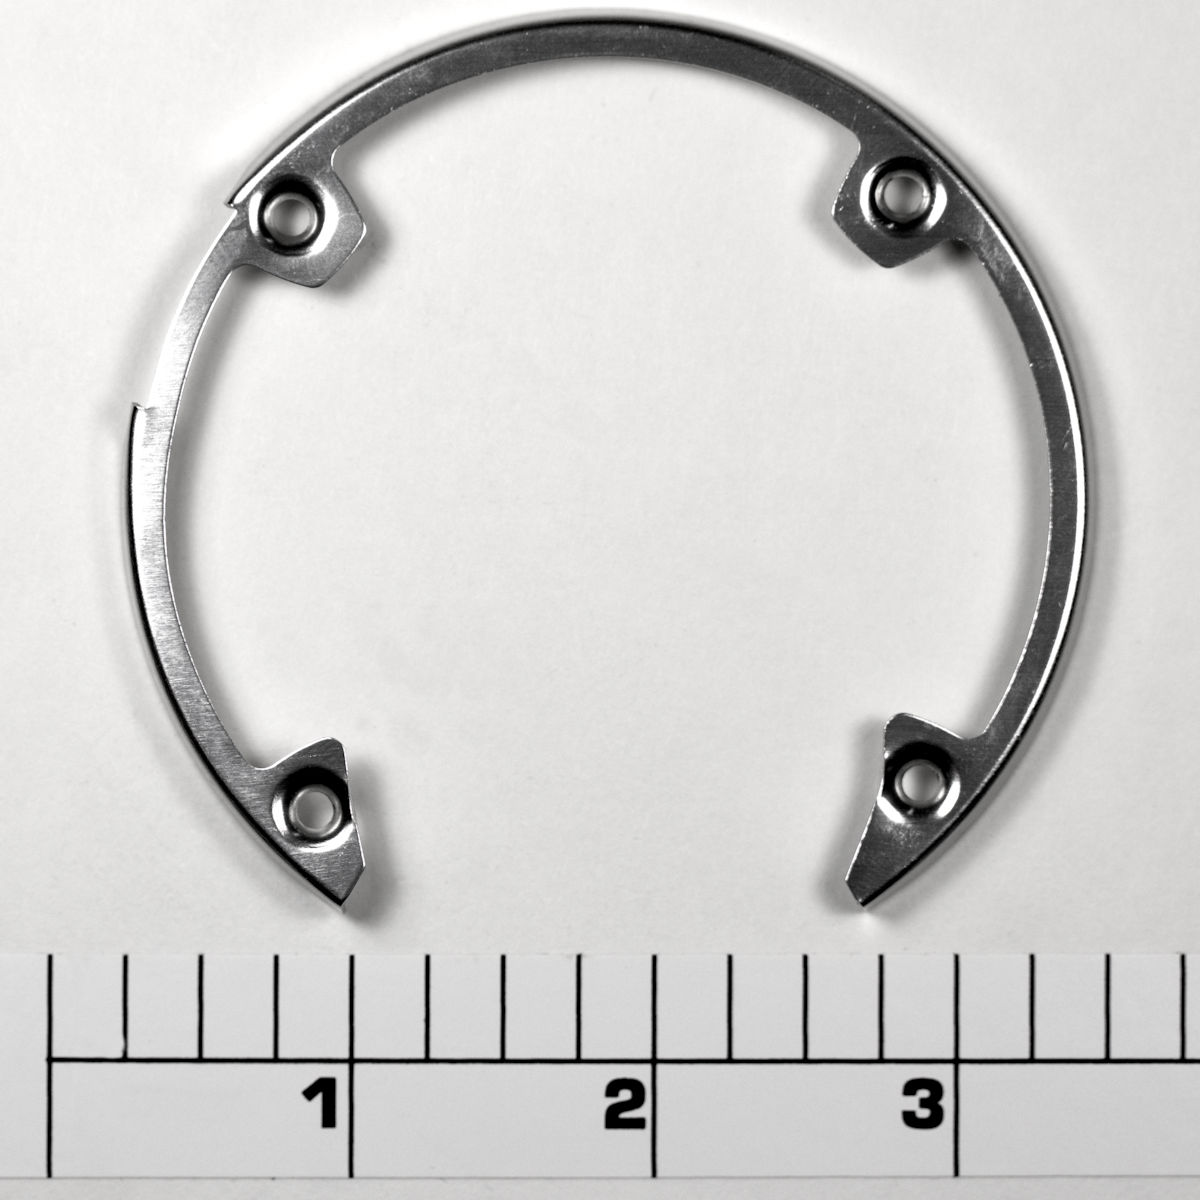 2-RVL30LWLCLH Ring, Handle Side Ring (Left Hand)